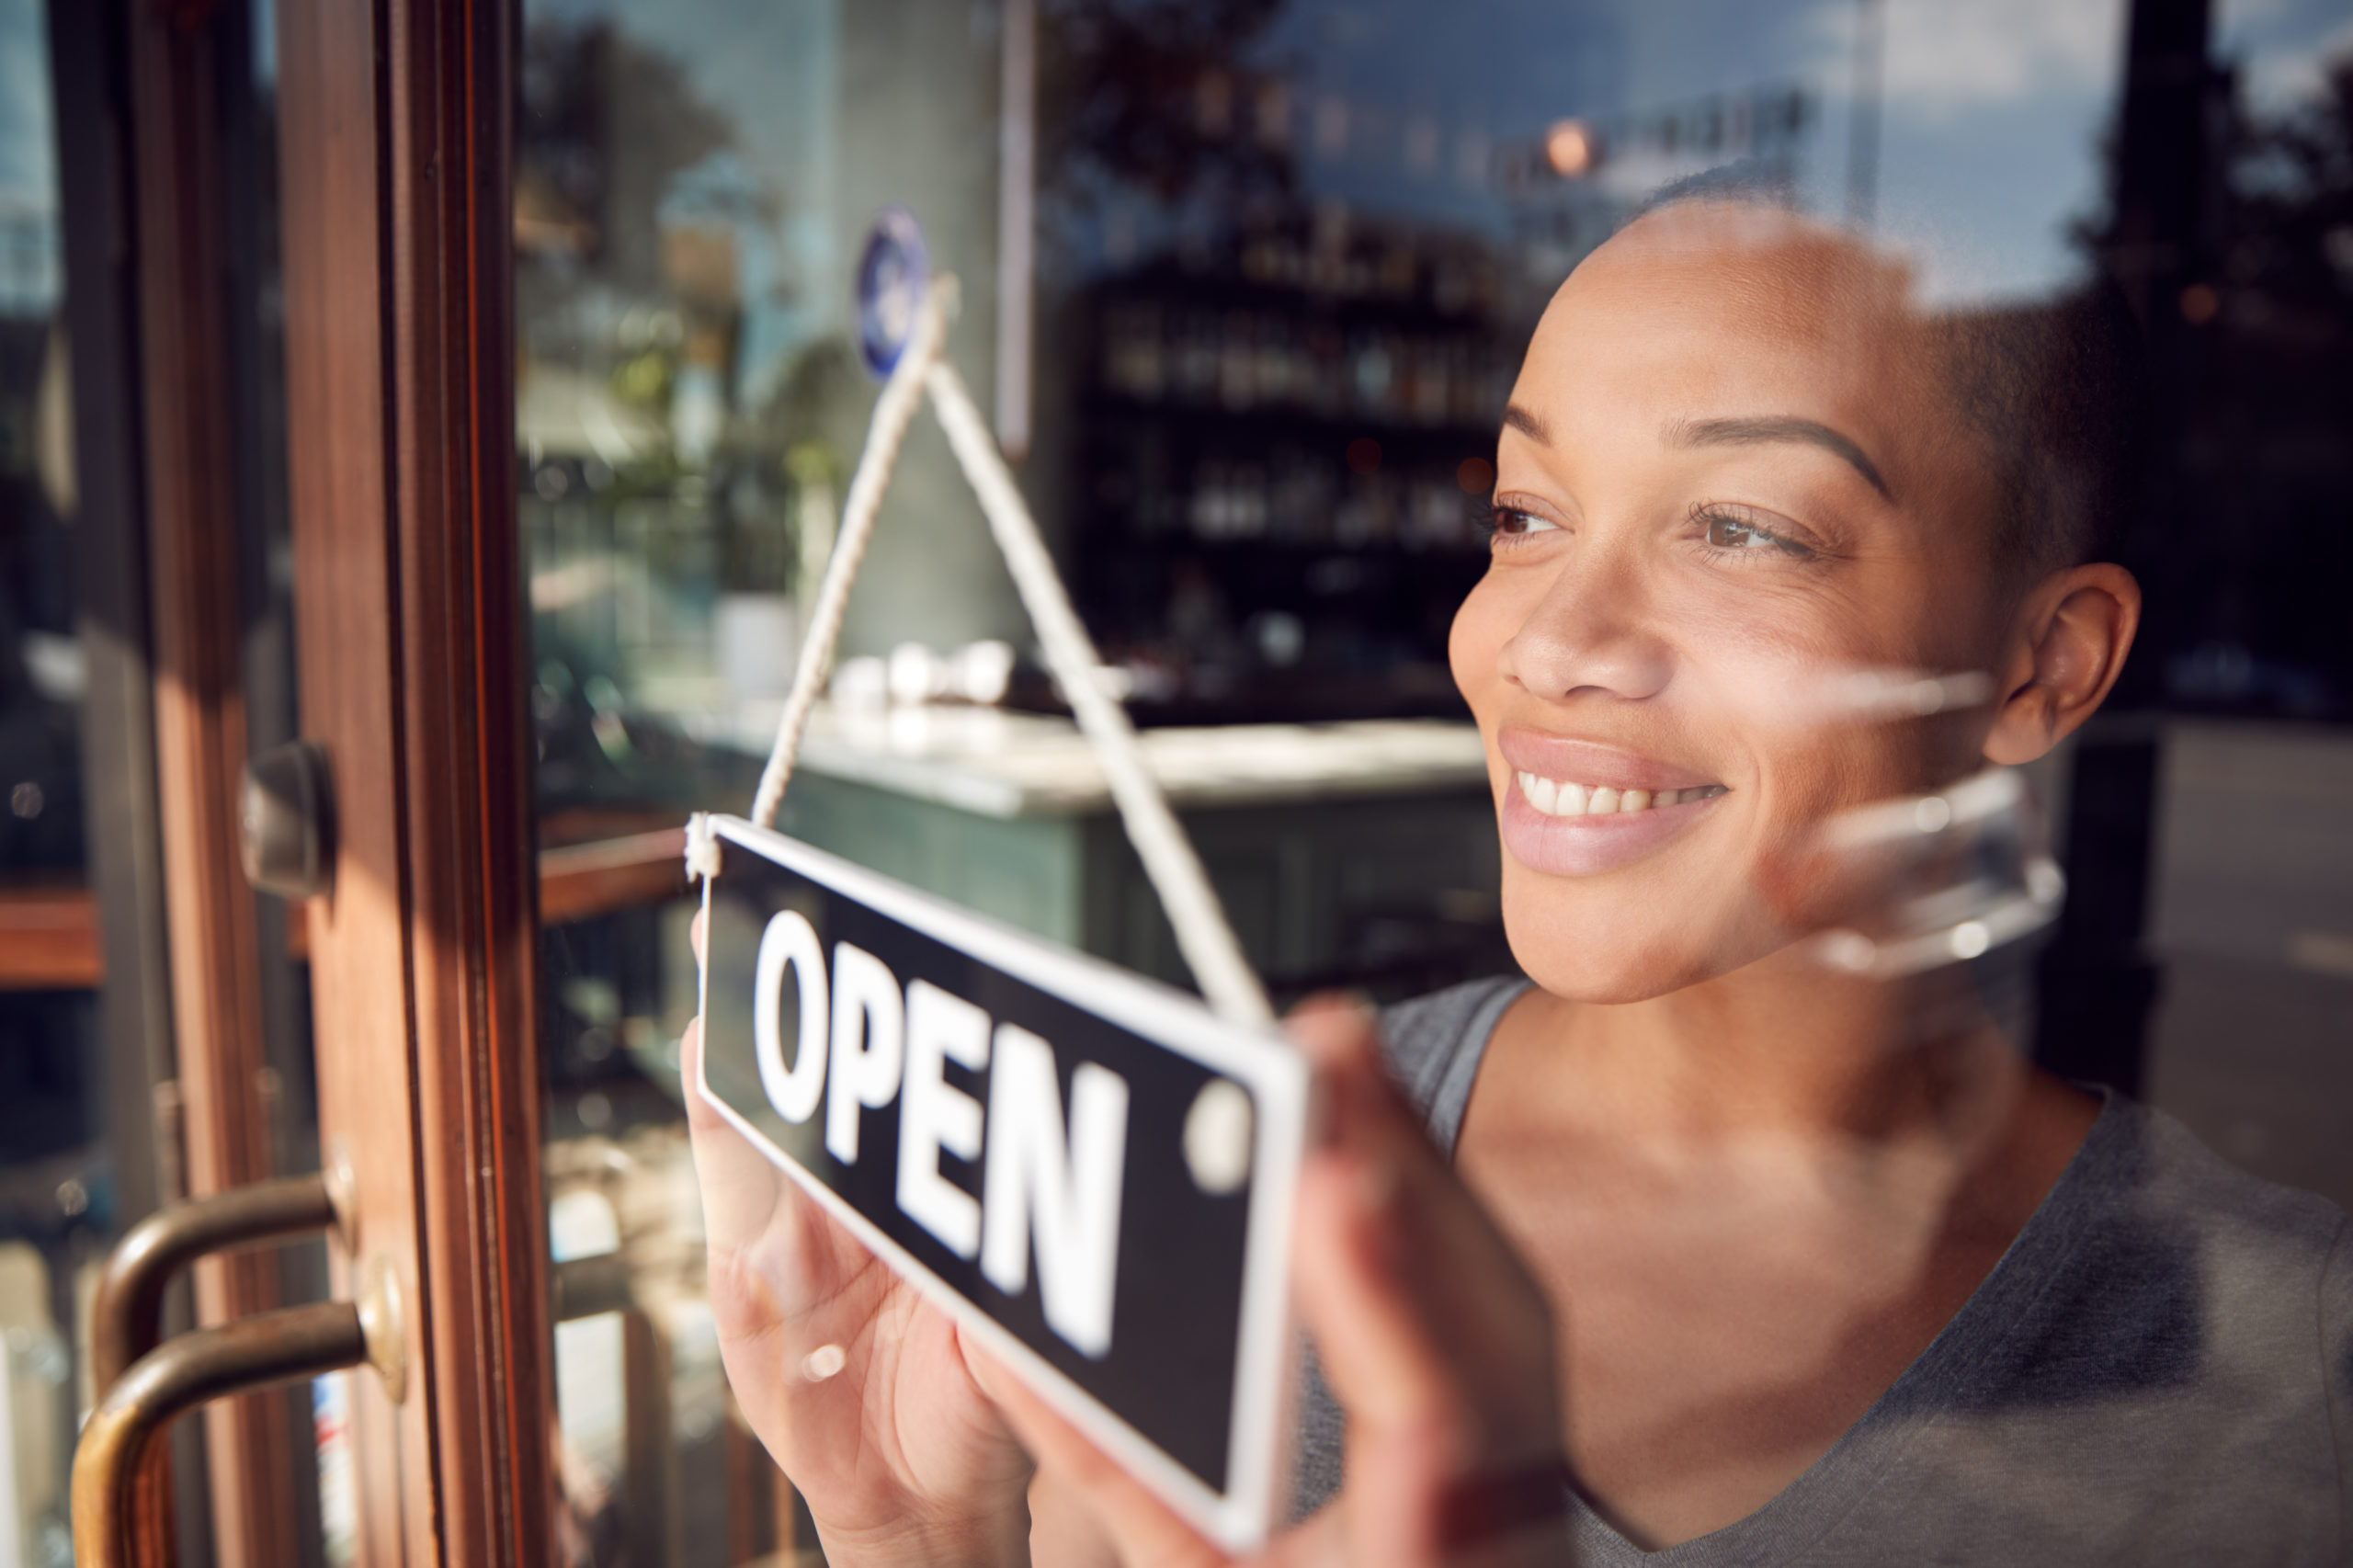 do you need commercial umbrella insurance? image shows business owner at the door of her business